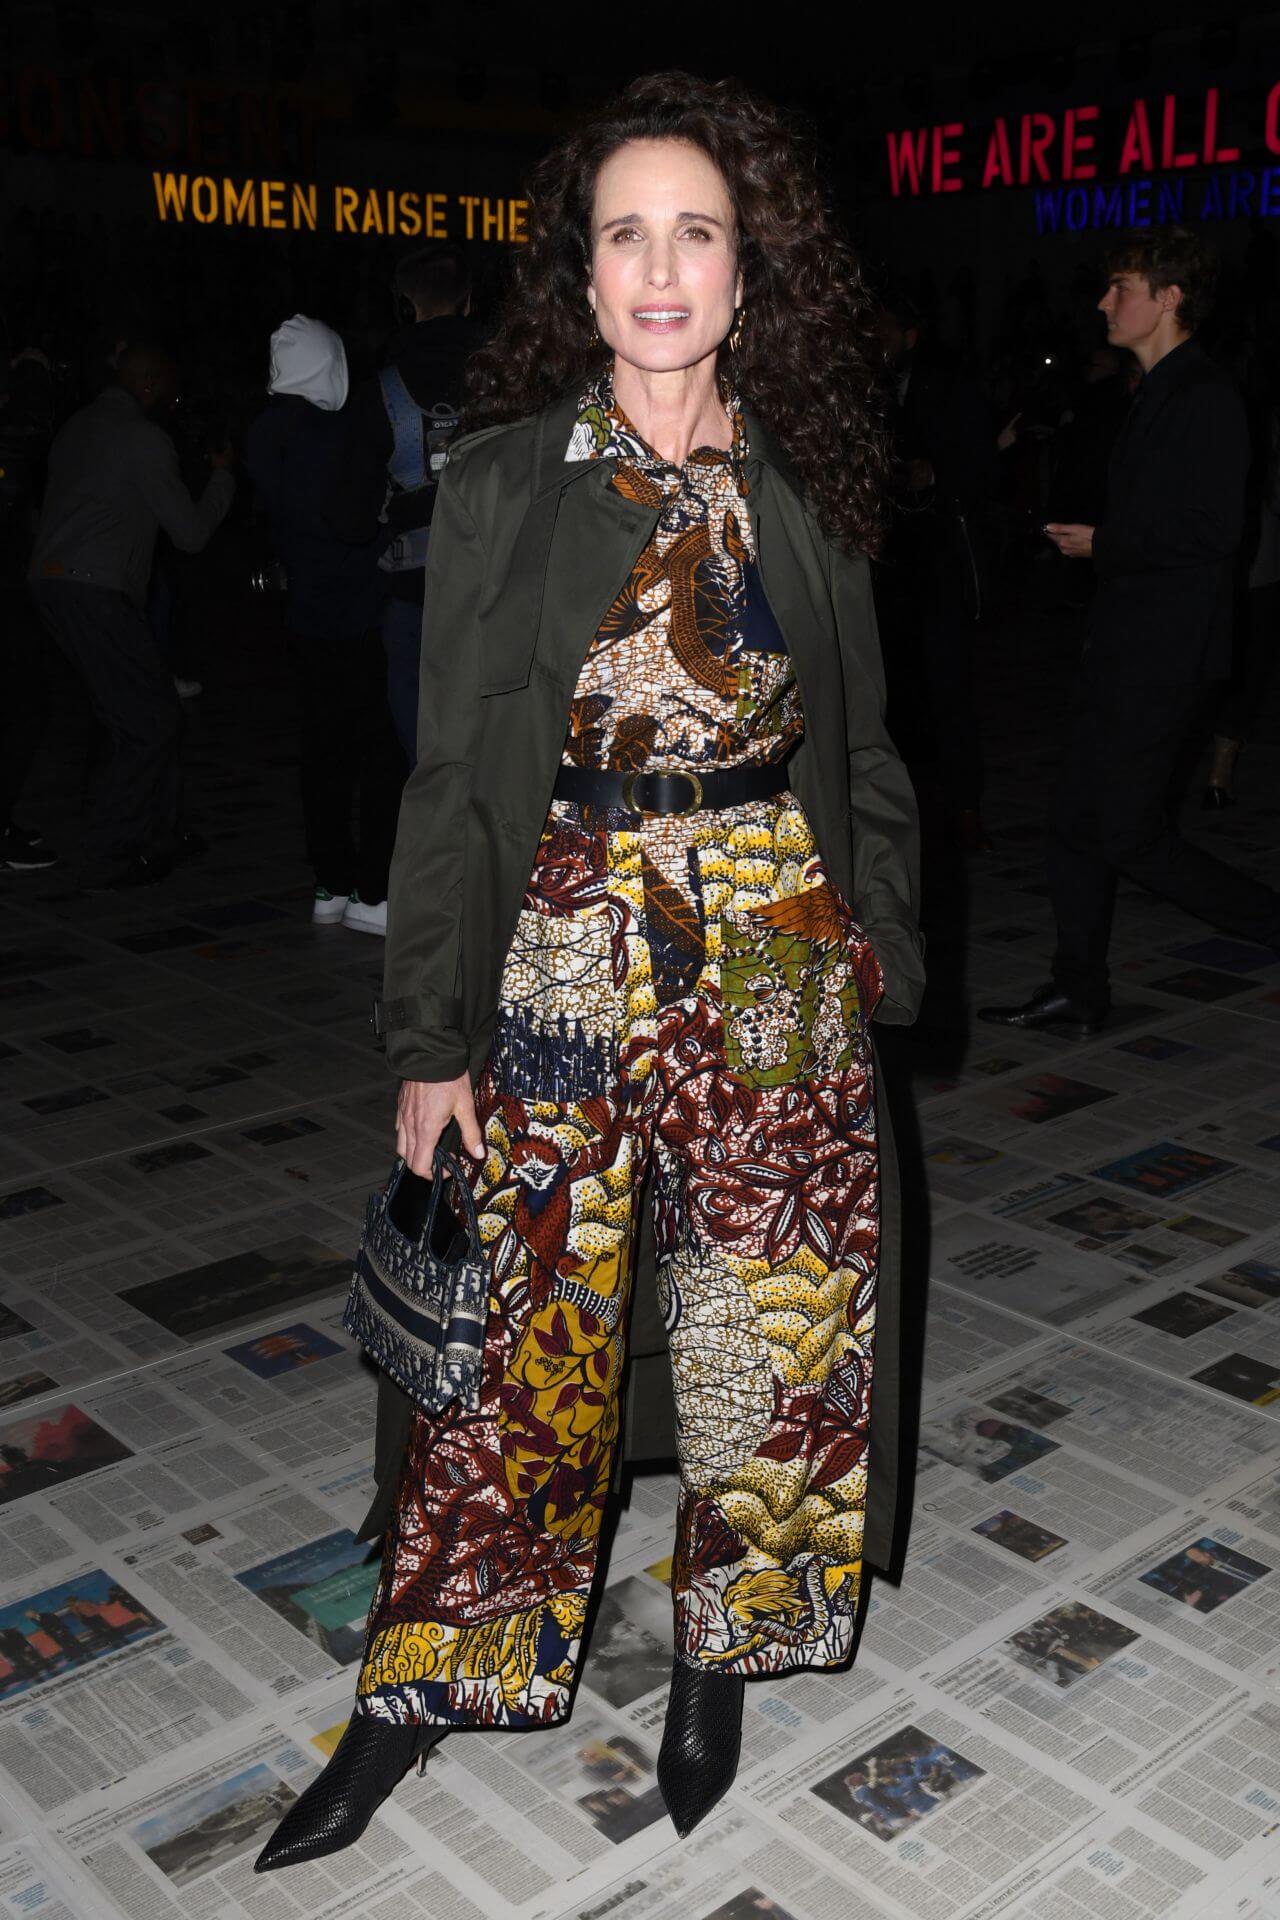 Andie MacDowell In Printed Long Dress With Olive Green Long Coat At Dior Show In Paris Fashion Week